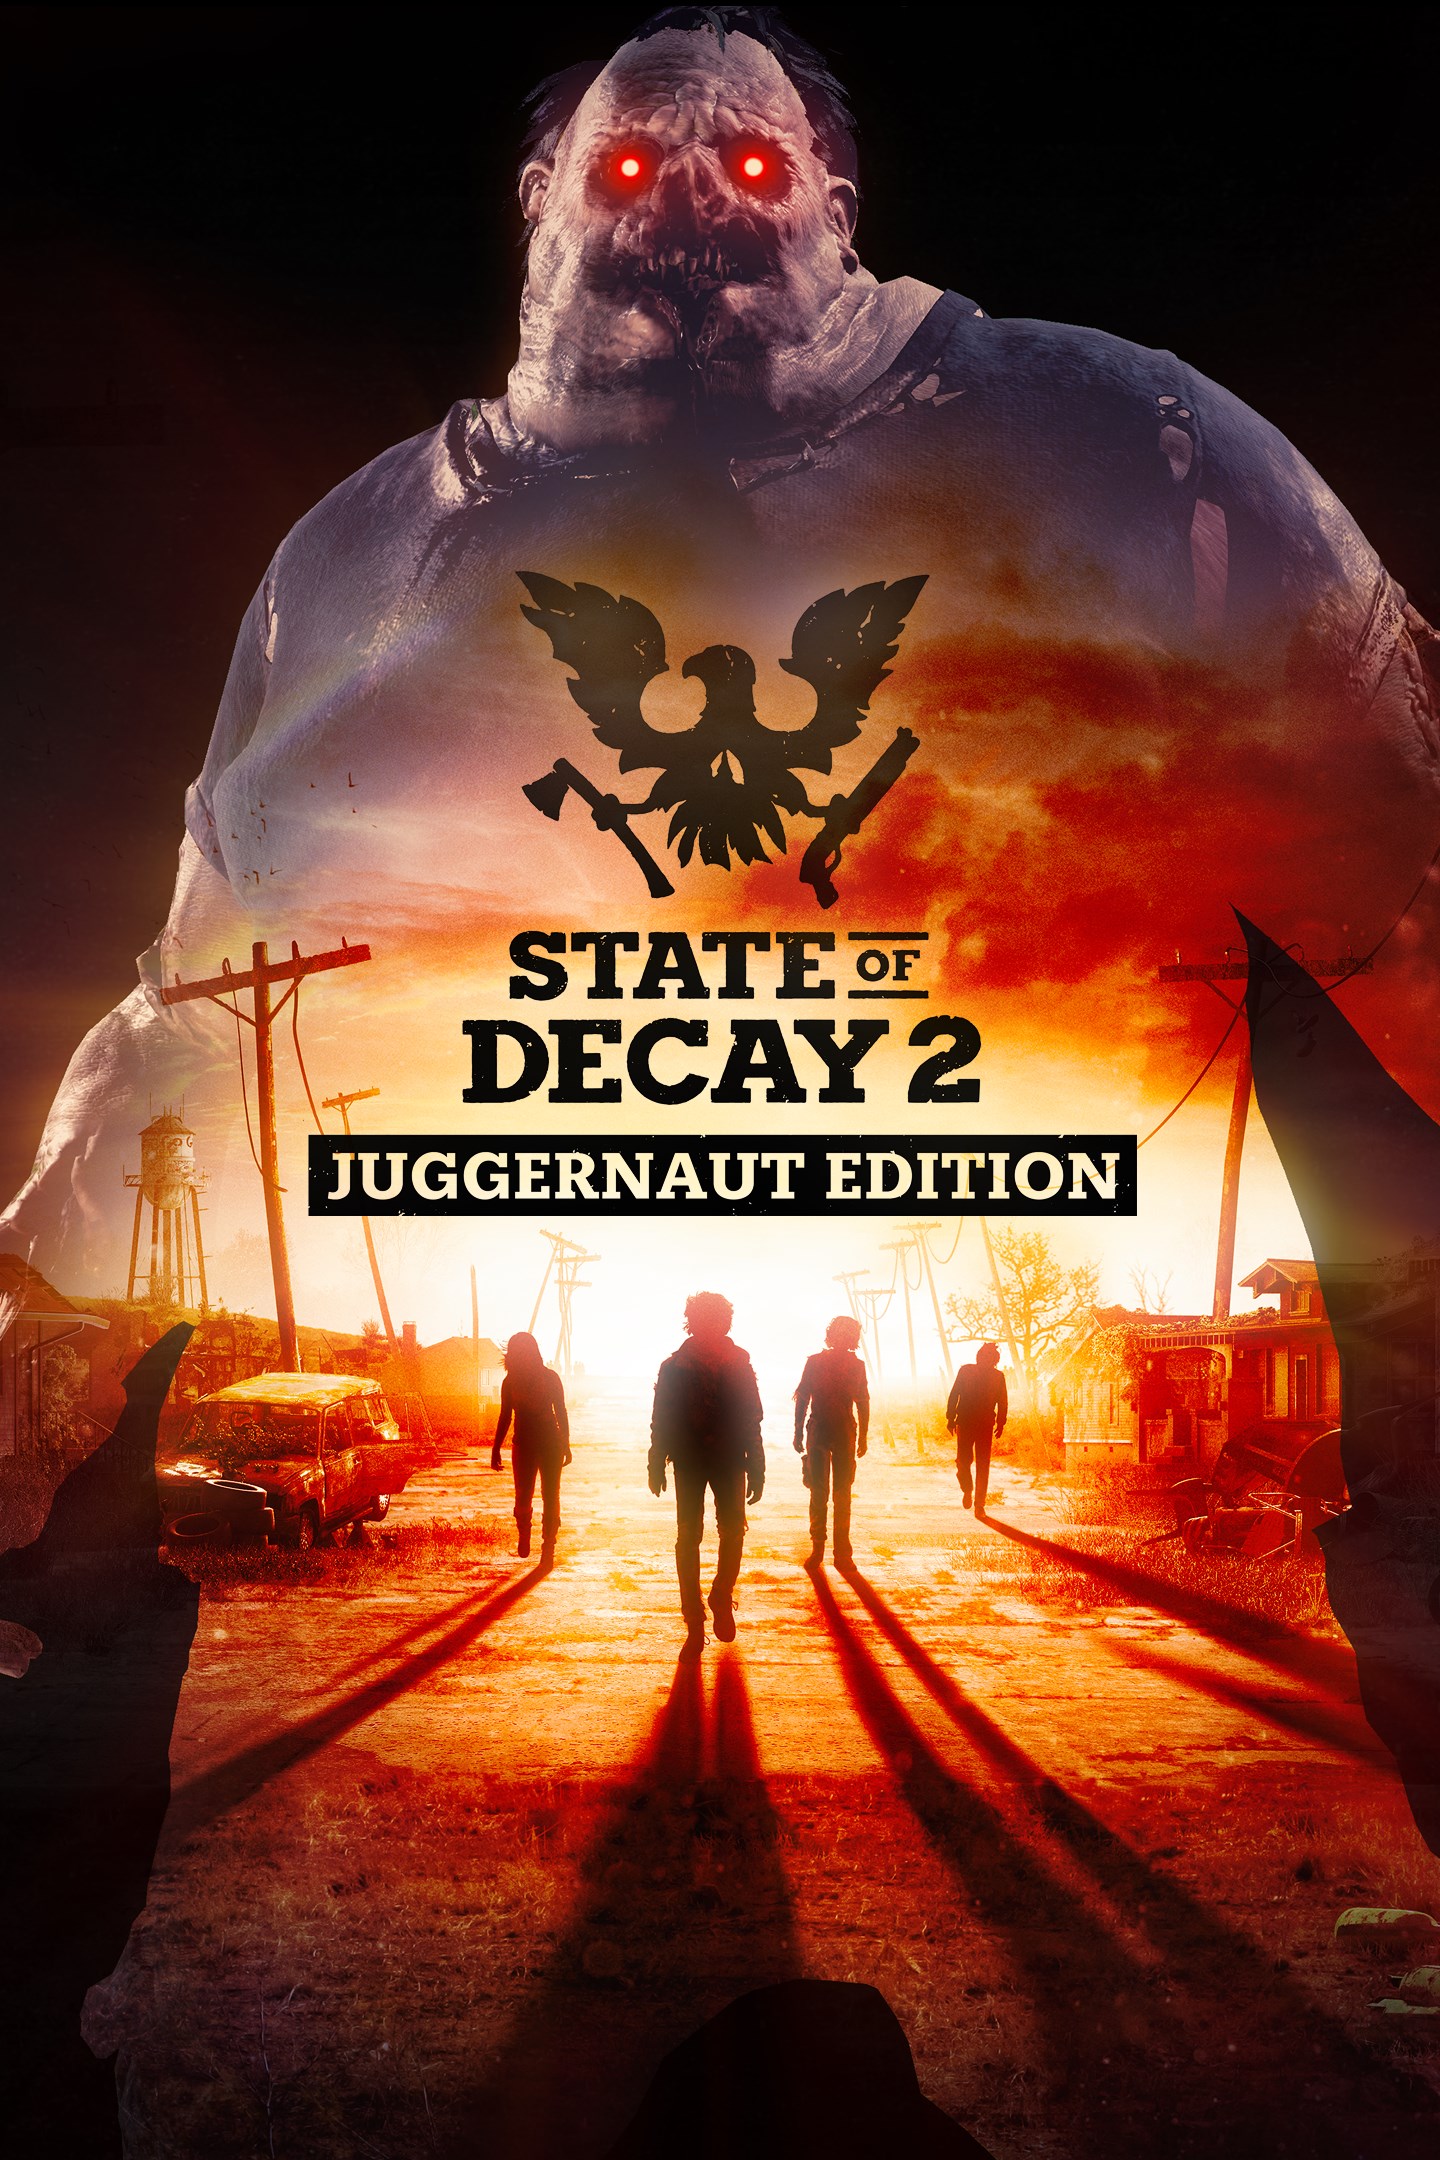 State of Decay 2 from Mechanics